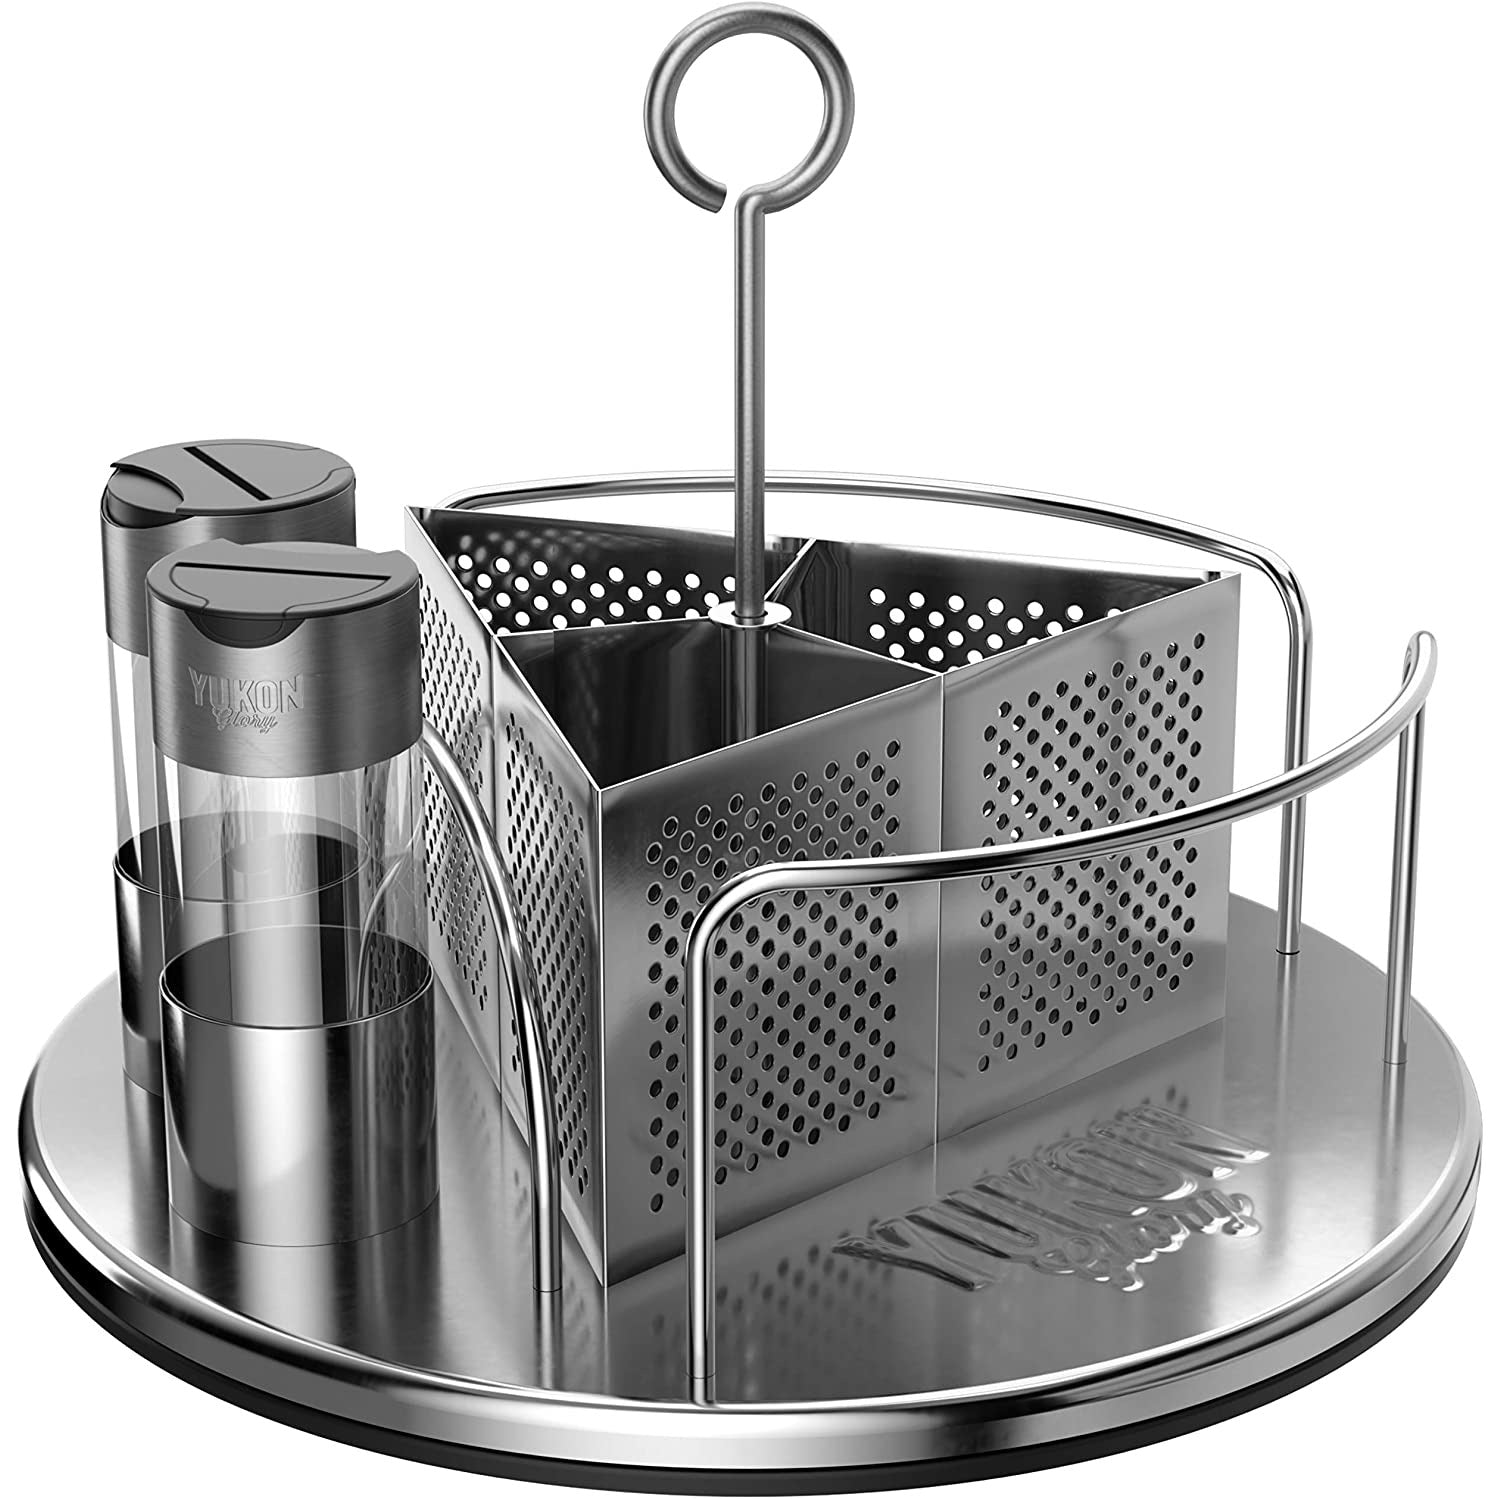 Yukon Glory Rotating Organizer Caddy For Utensils, Sauces, Condiments, Napkins, Salt and Pepper